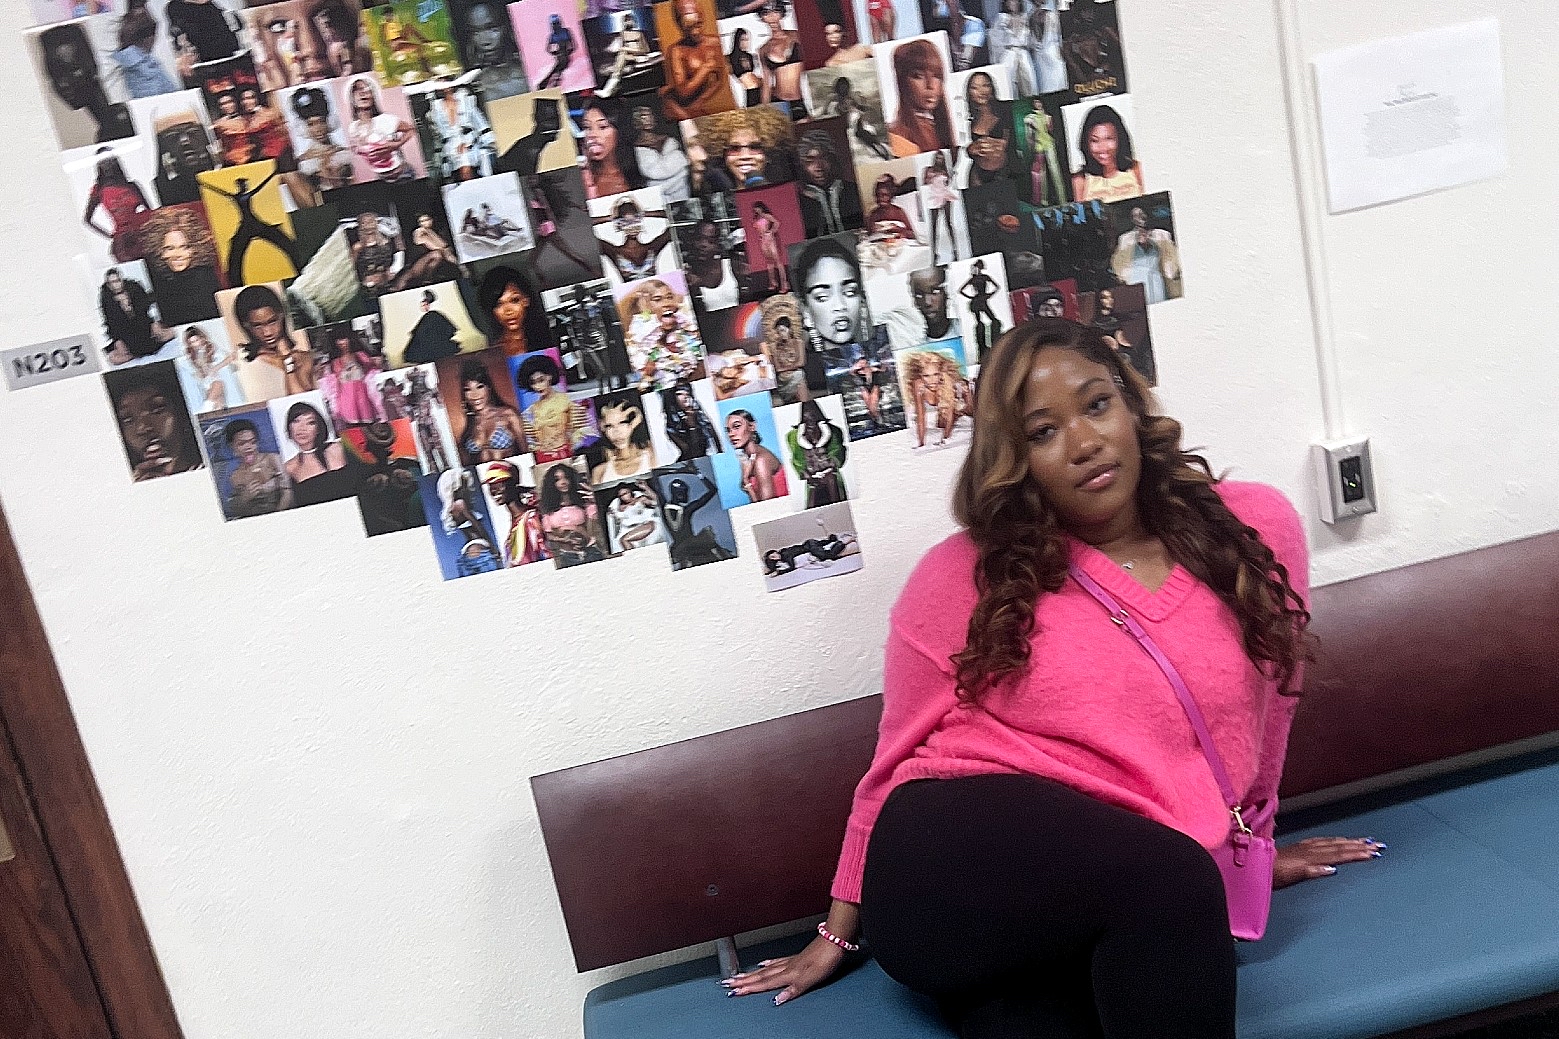 Woman sitting on a couch looking at camera with many photos pasted on a white wall behind her.